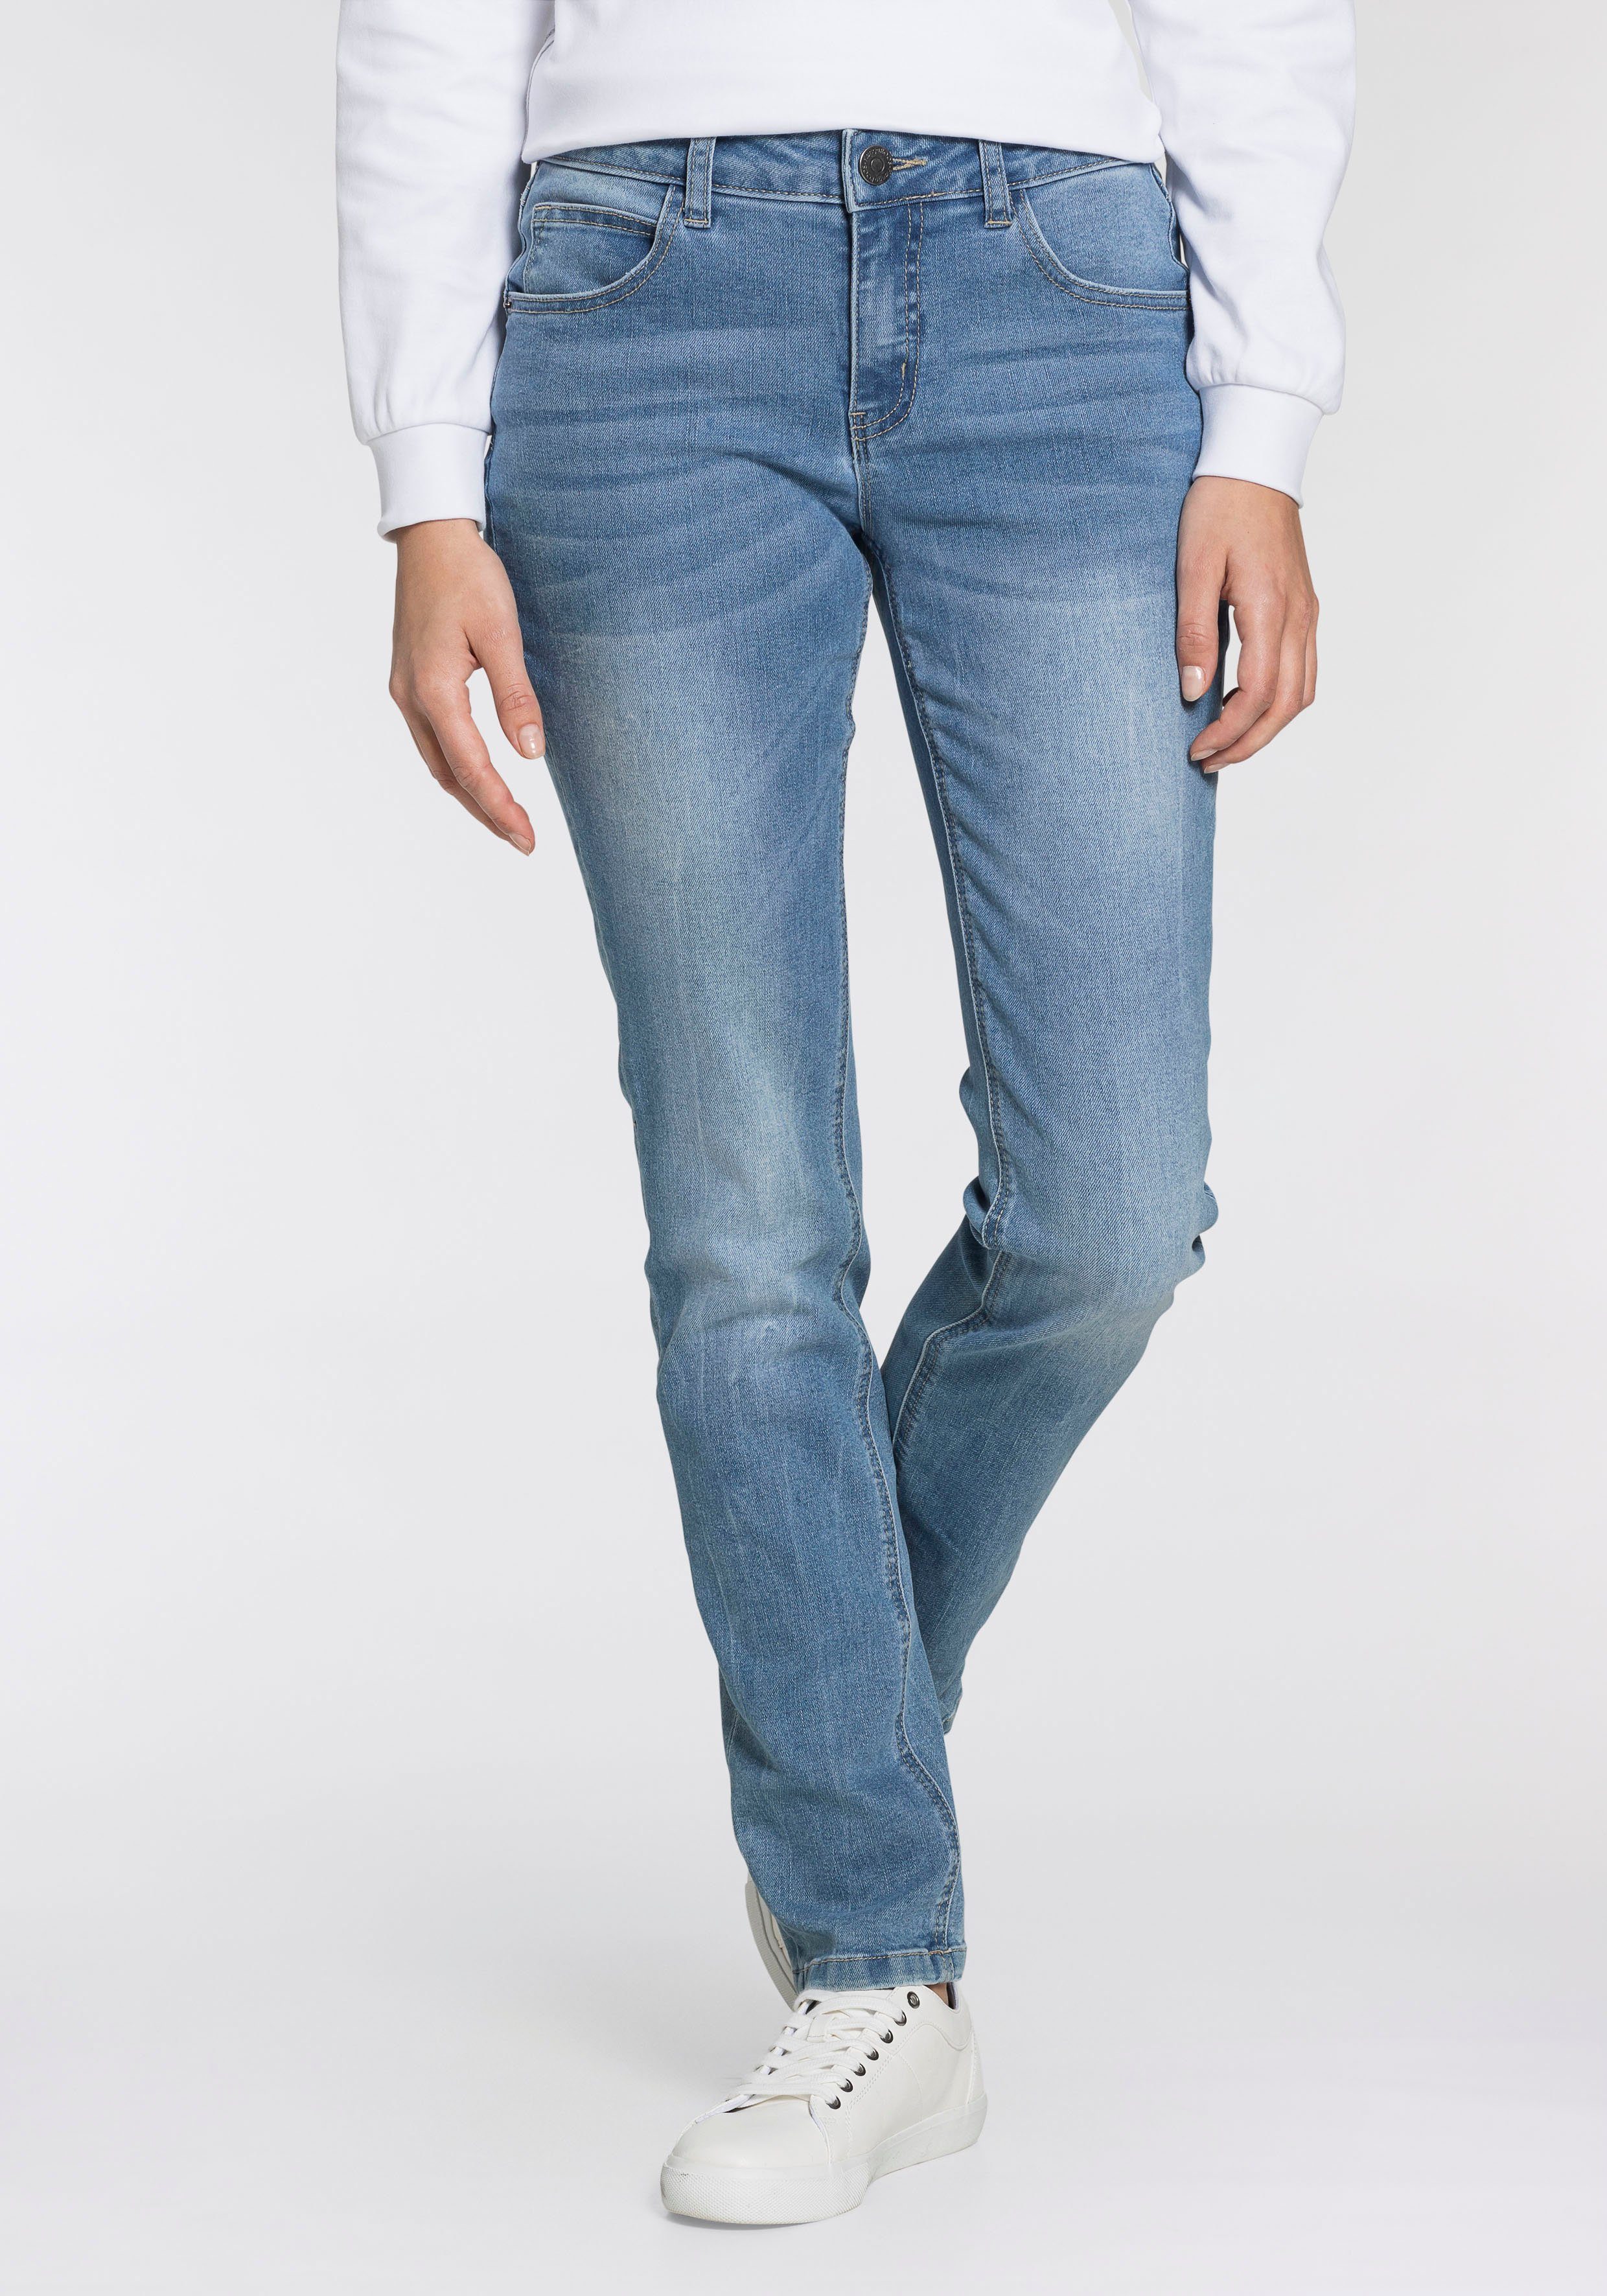 KangaROOS Relax-fit-Jeans RELAX-FIT light-blue-used HIGH WAIST